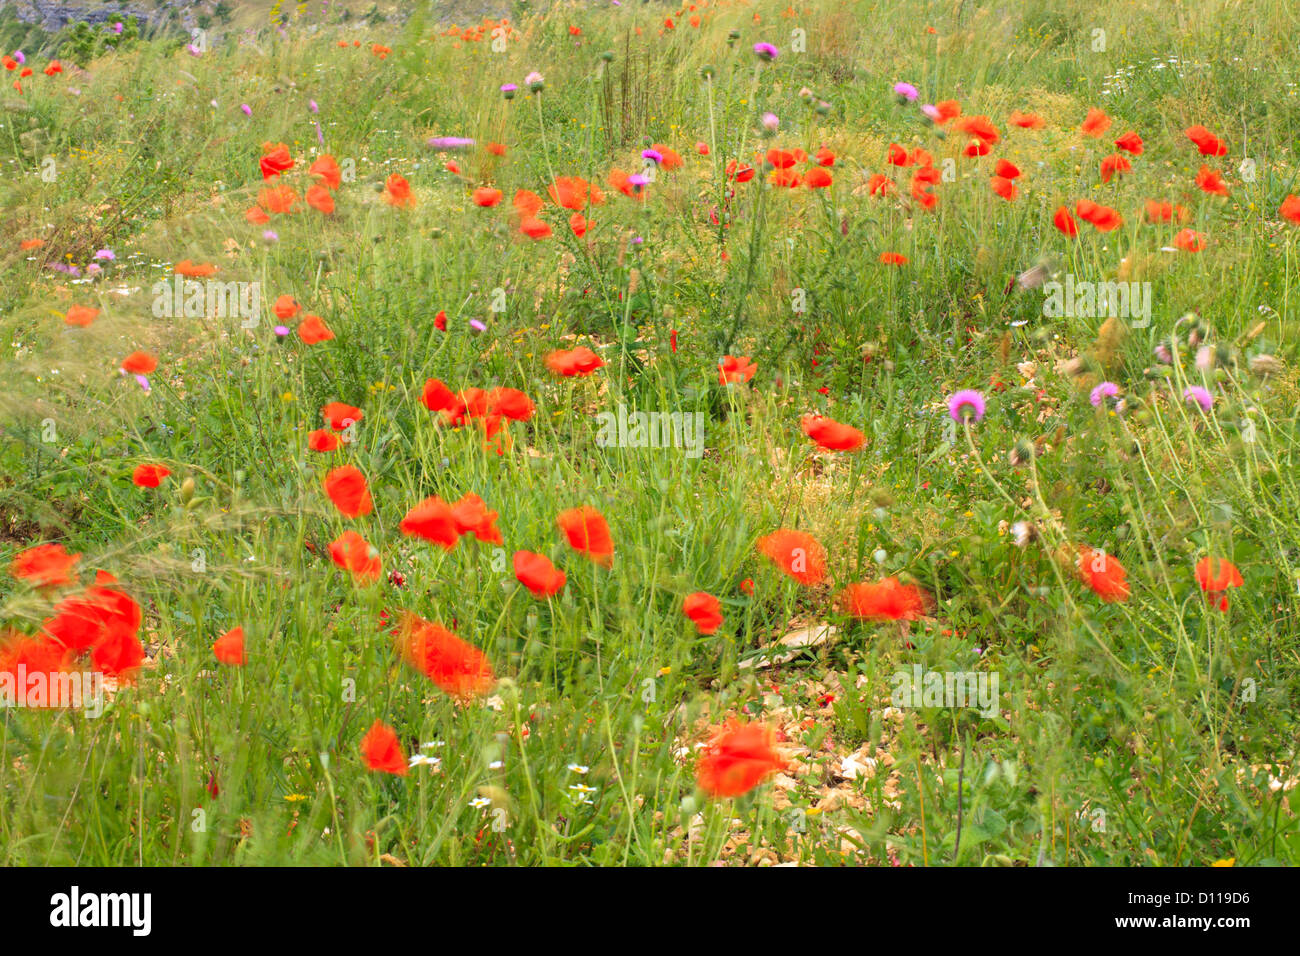 Disturbed ground habitat with flowering Corn Poppies (Papaver rhoeas) and Musk Thistles (Carduus nutans) on a windy day. France. Stock Photo